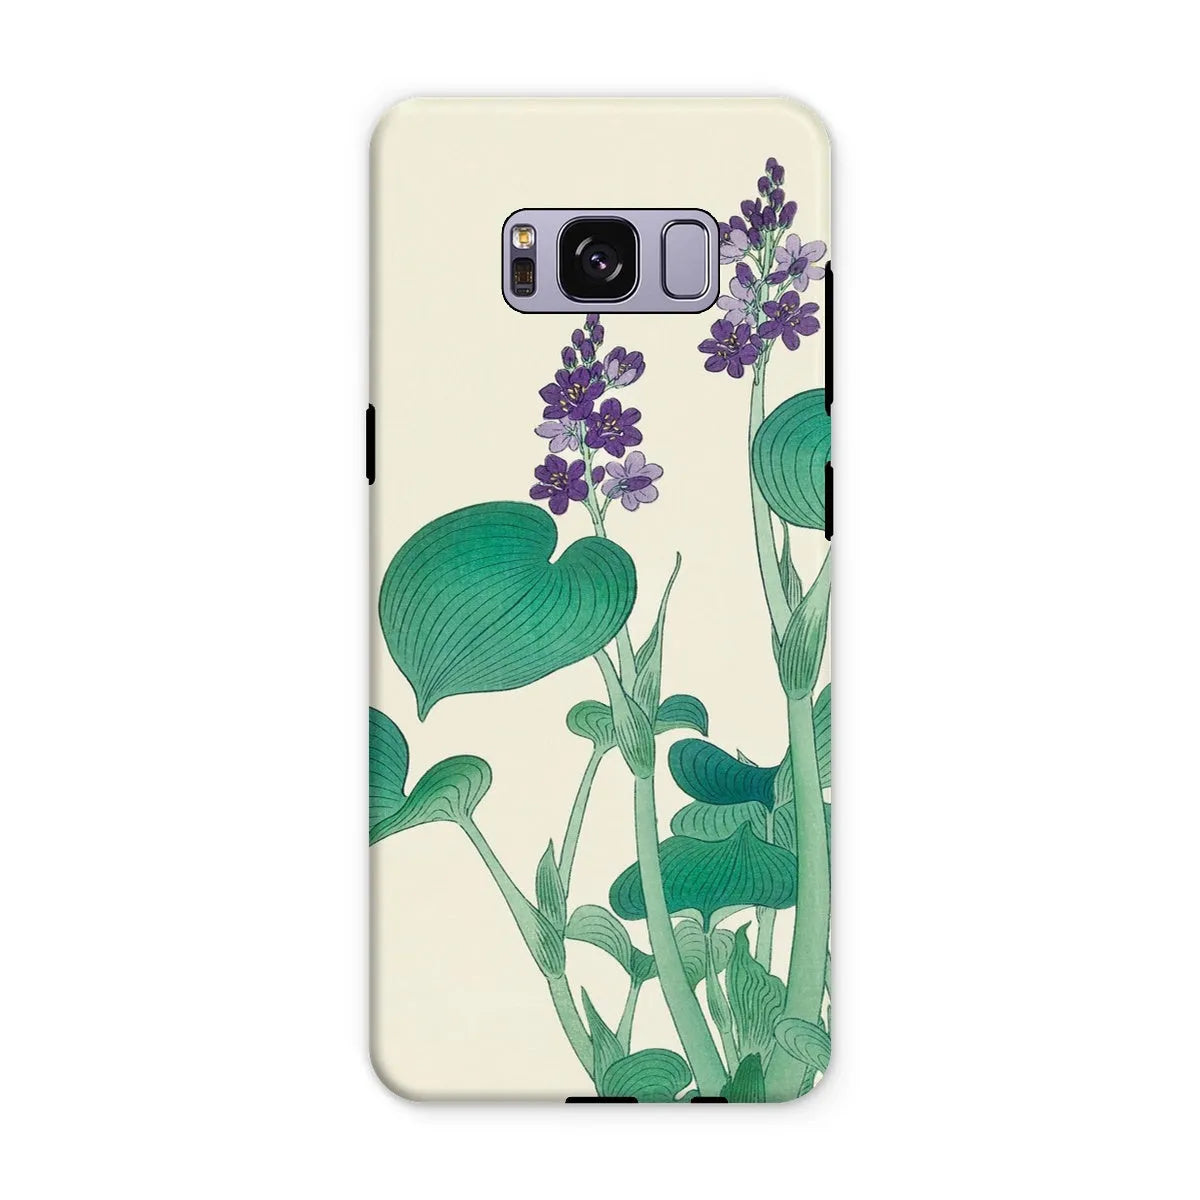 Blooming Hosta - Floral Aesthetic Art Phone Case - Ohara Koson - Samsung Galaxy S8 Plus / Matte - Mobile Phone Cases